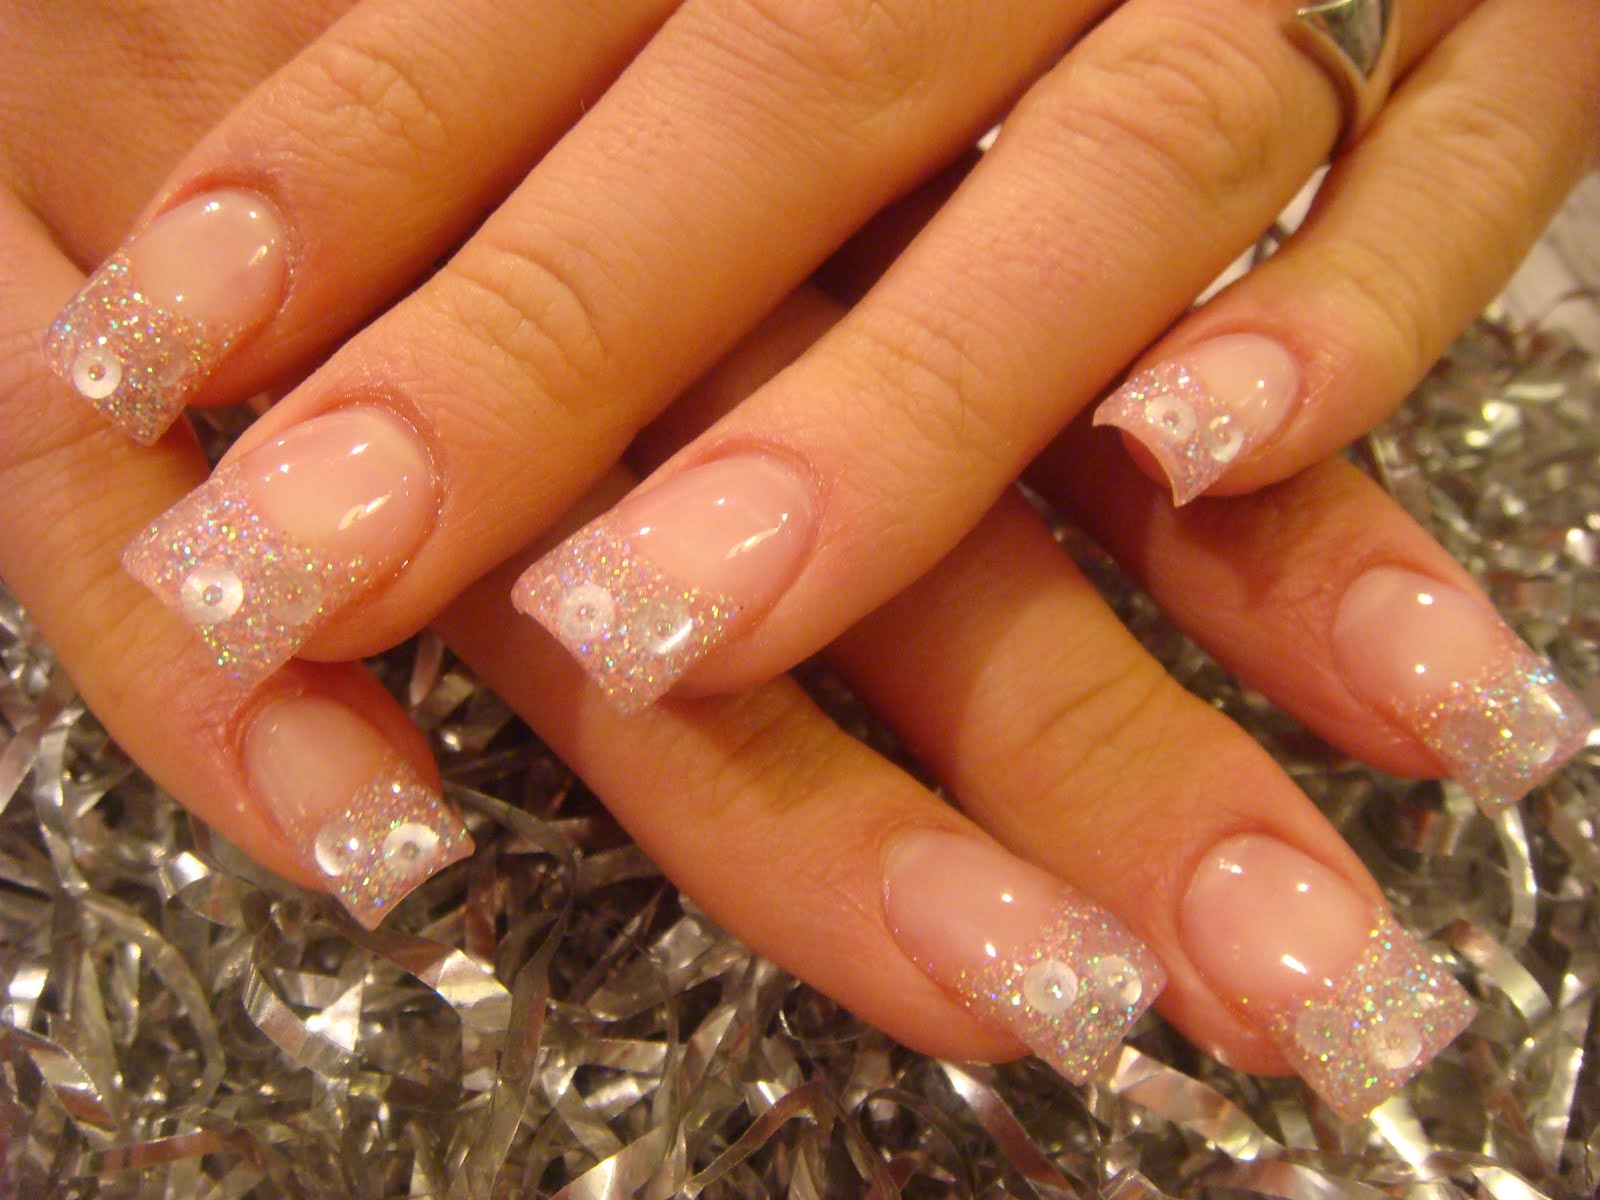 This is a light pink from Young Nails called Sakura storm